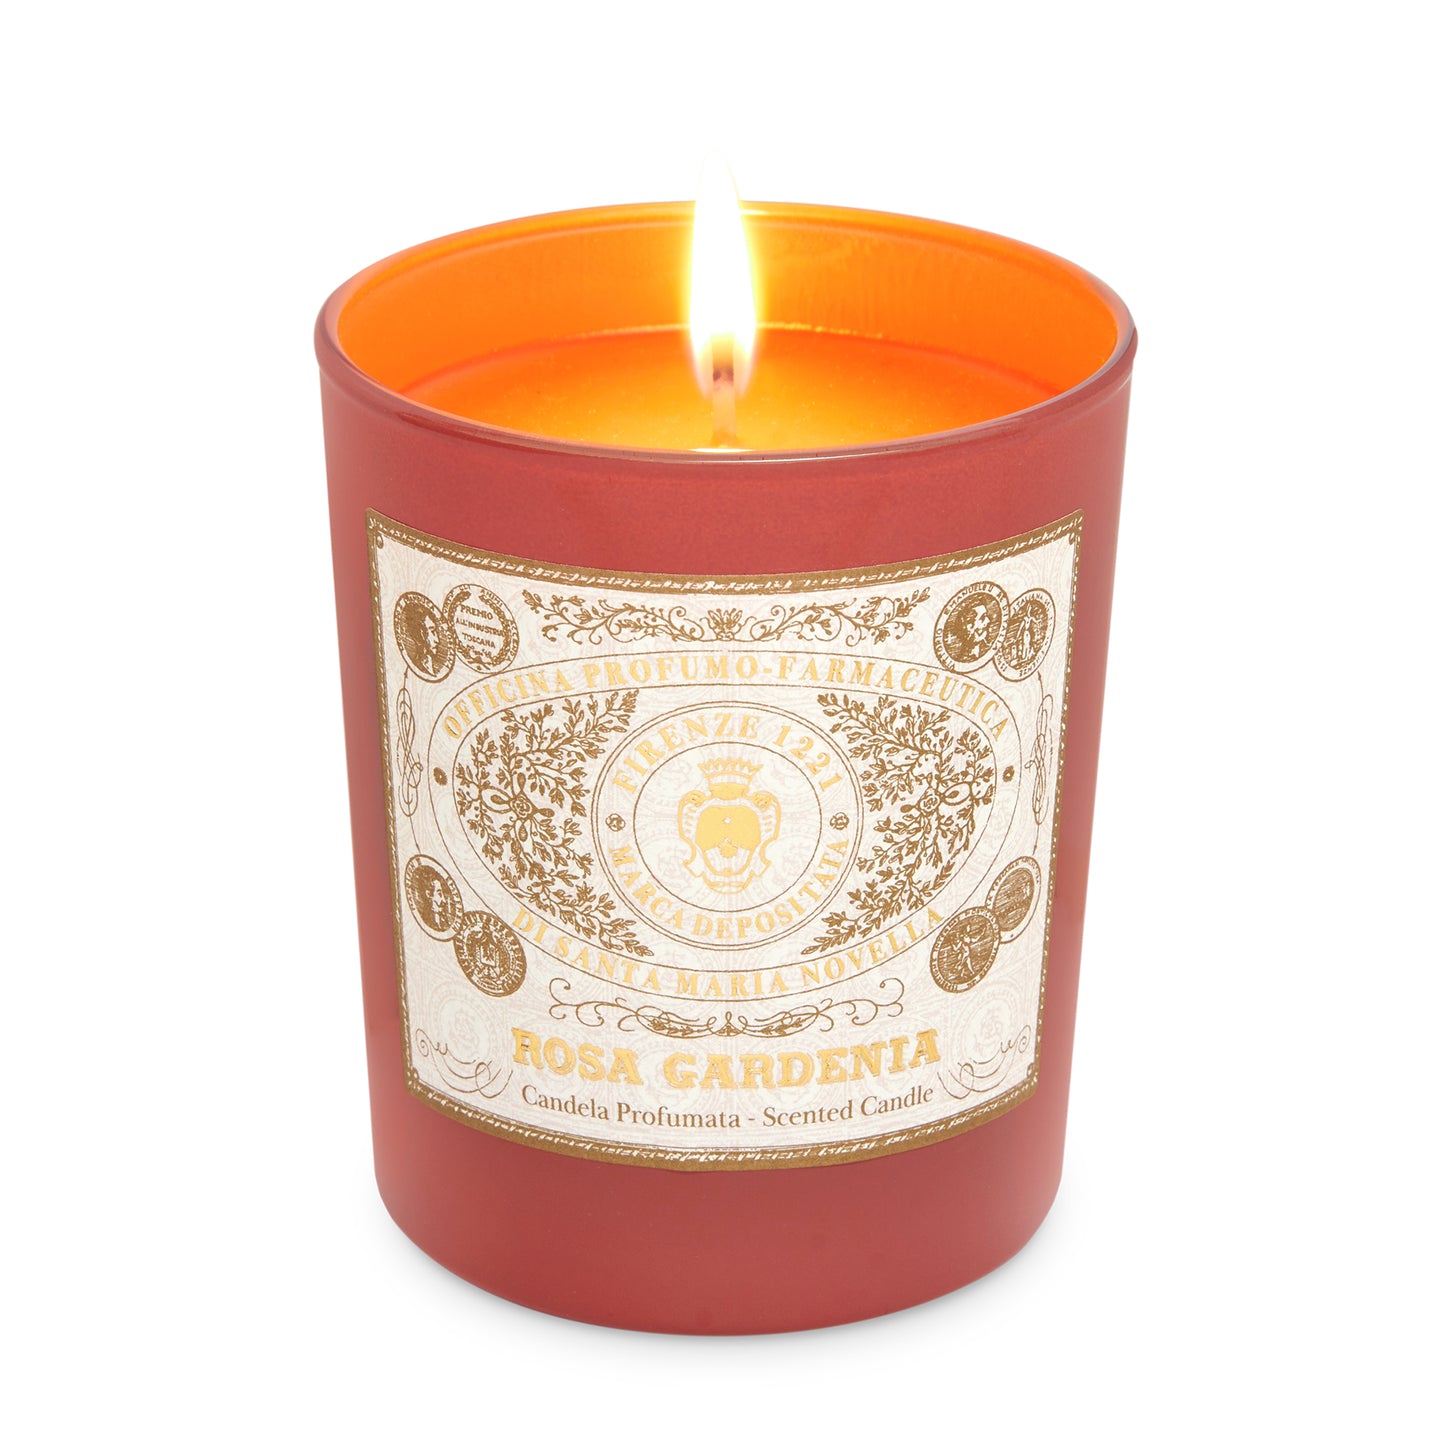 Primary Image of Rosa Gardenia Scented Candle